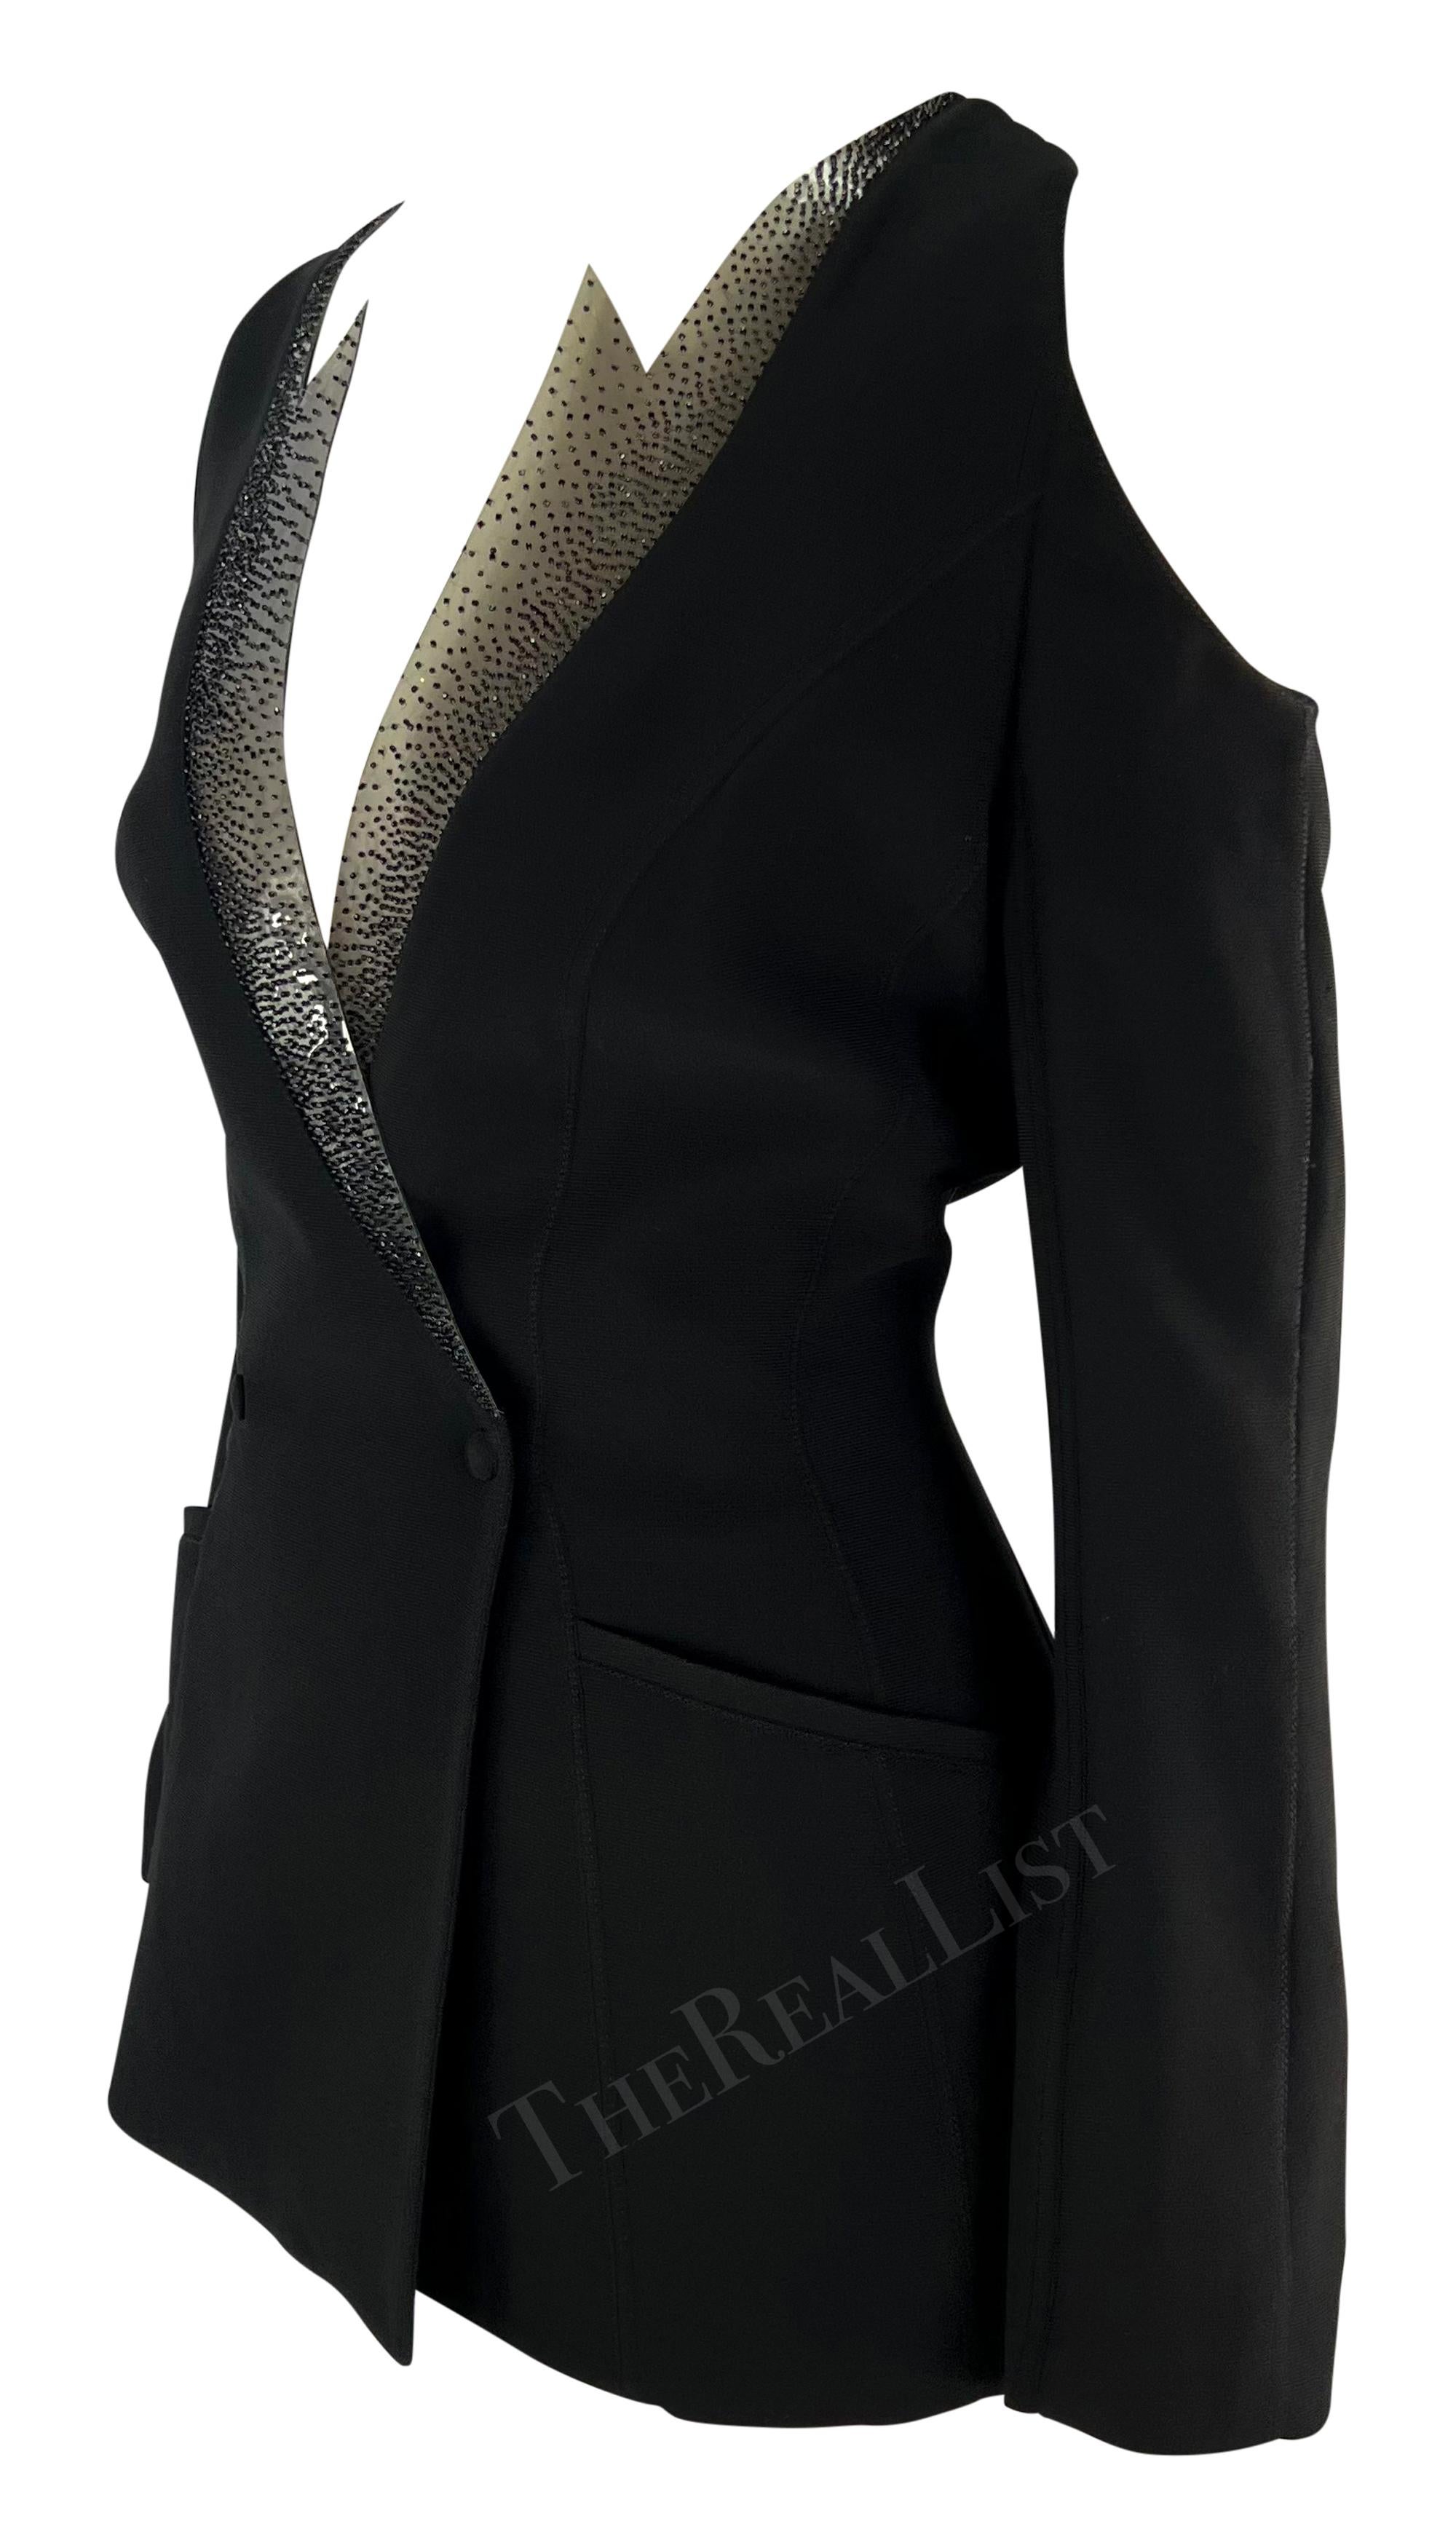 S/S 2001 Thierry Mugler Runway Beaded PVC Cutout Black Plunging Blazer For Sale 2